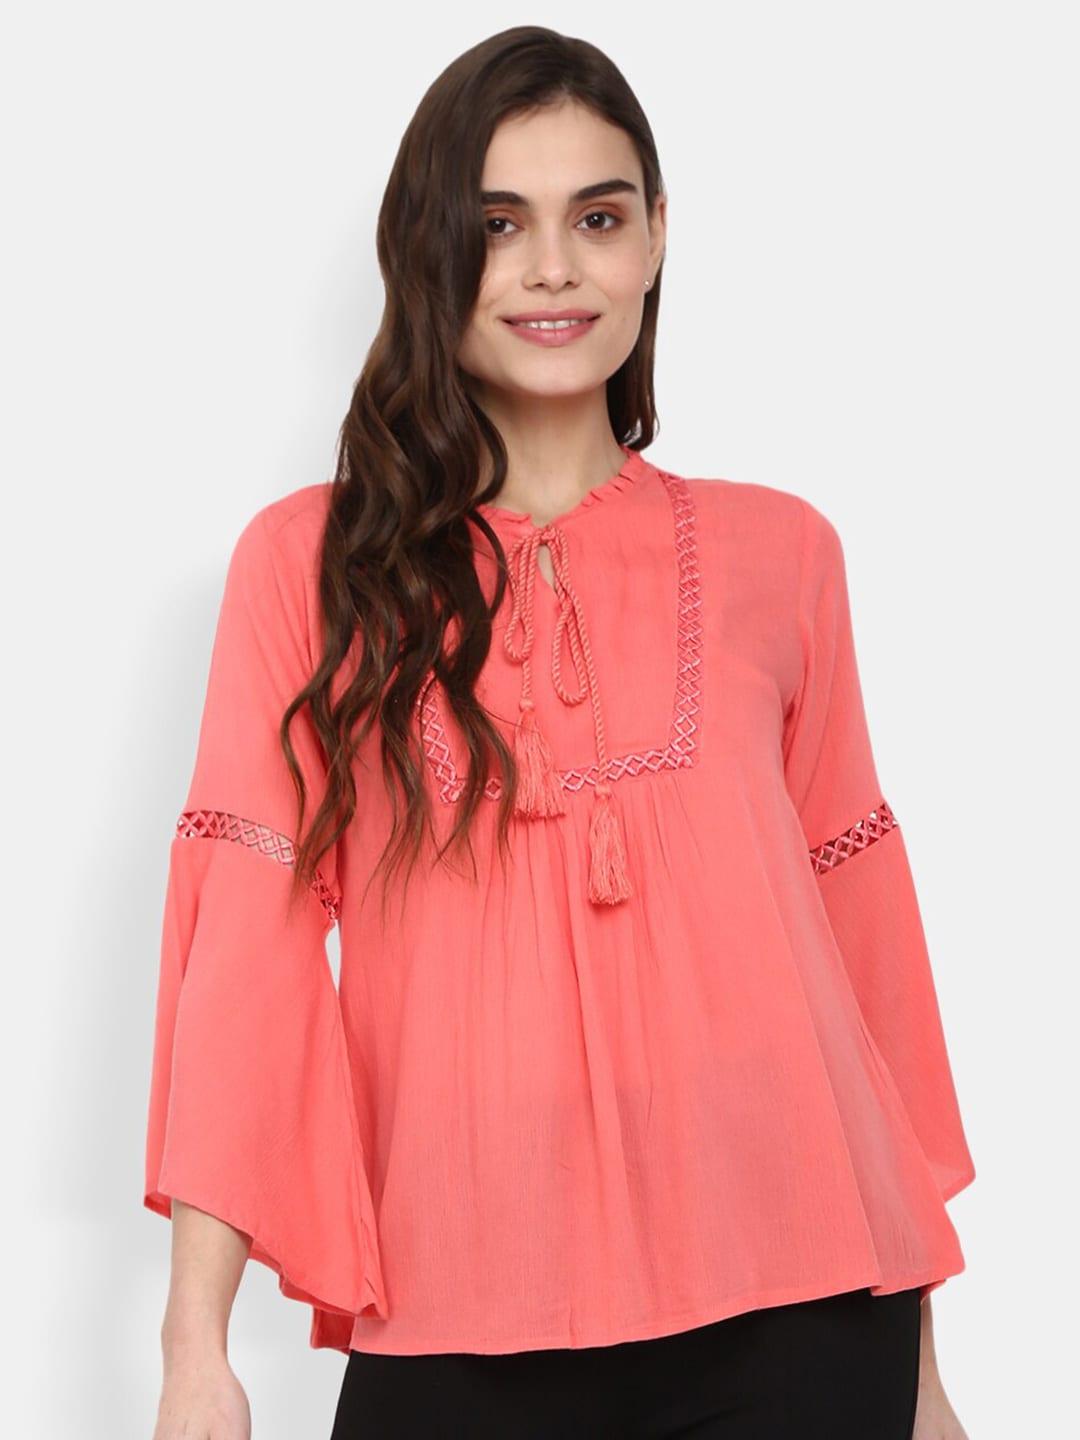 v-mart women western solid peach-coloured tie-up neck a-line top